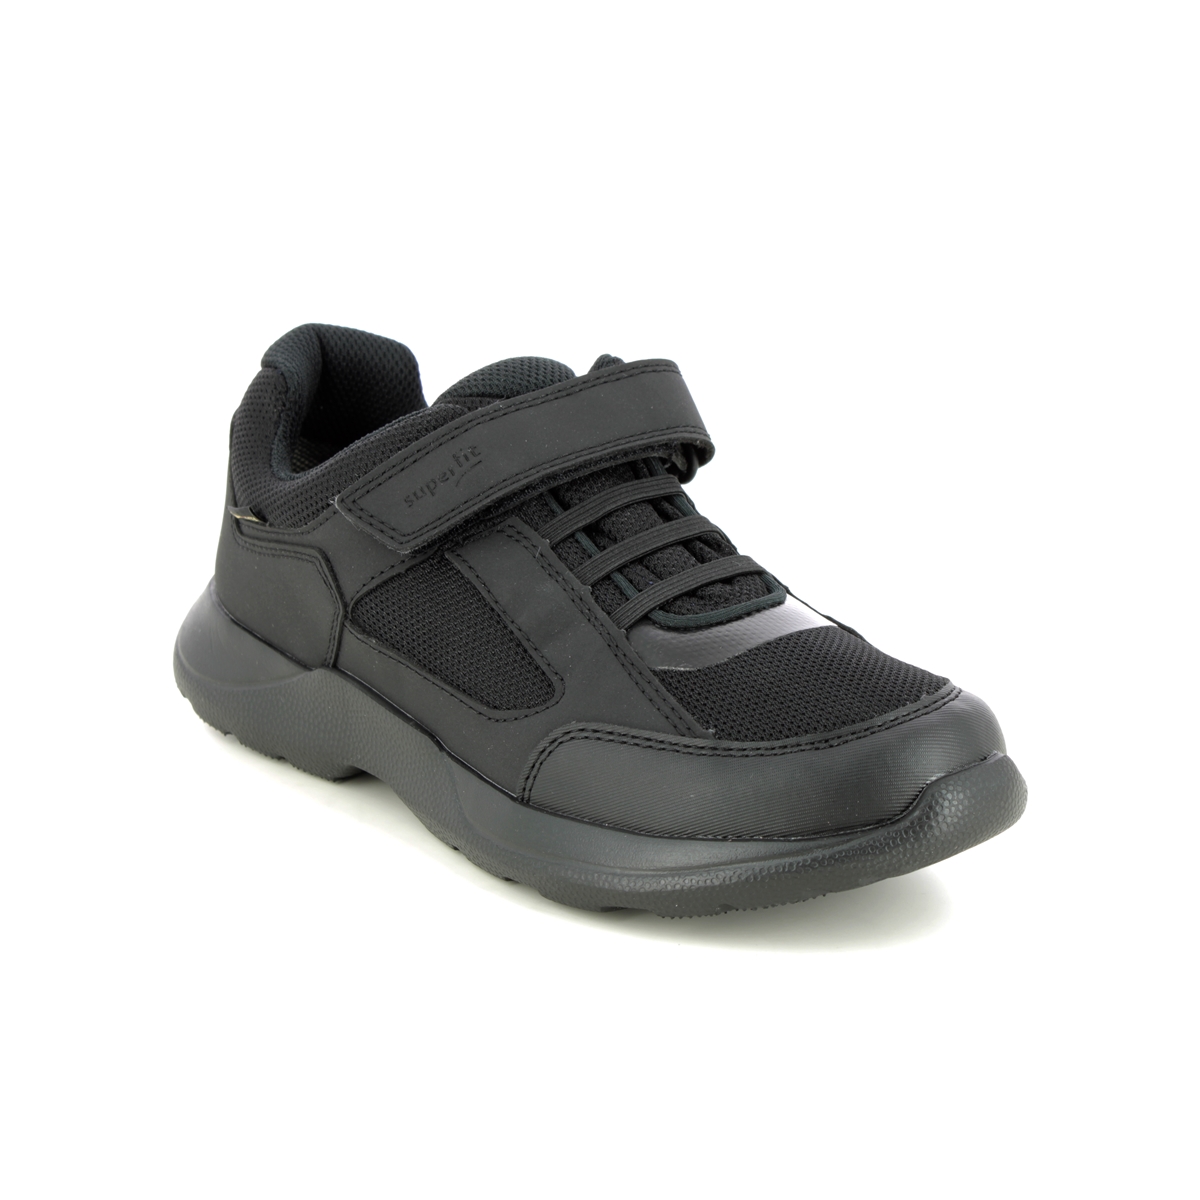 Superfit Rush Gtx Bungee Black Kids trainers 1006223-0000 in a Plain Man-made in Size 33